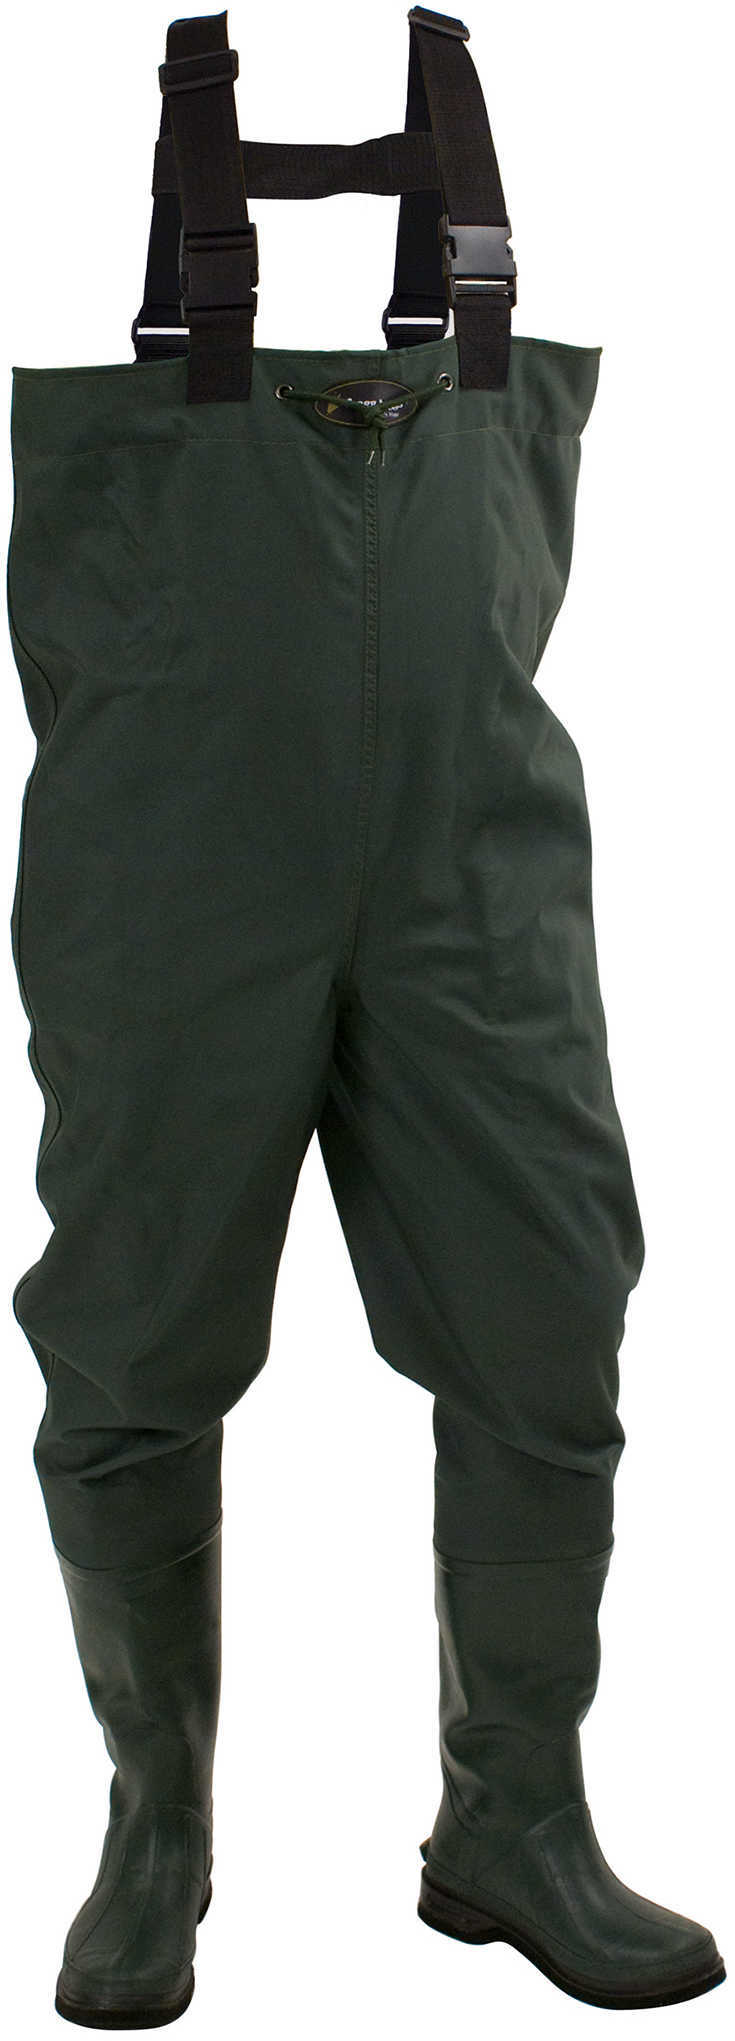 Frogg Toggs Wader Forest Green Cleated Size 12 271524312